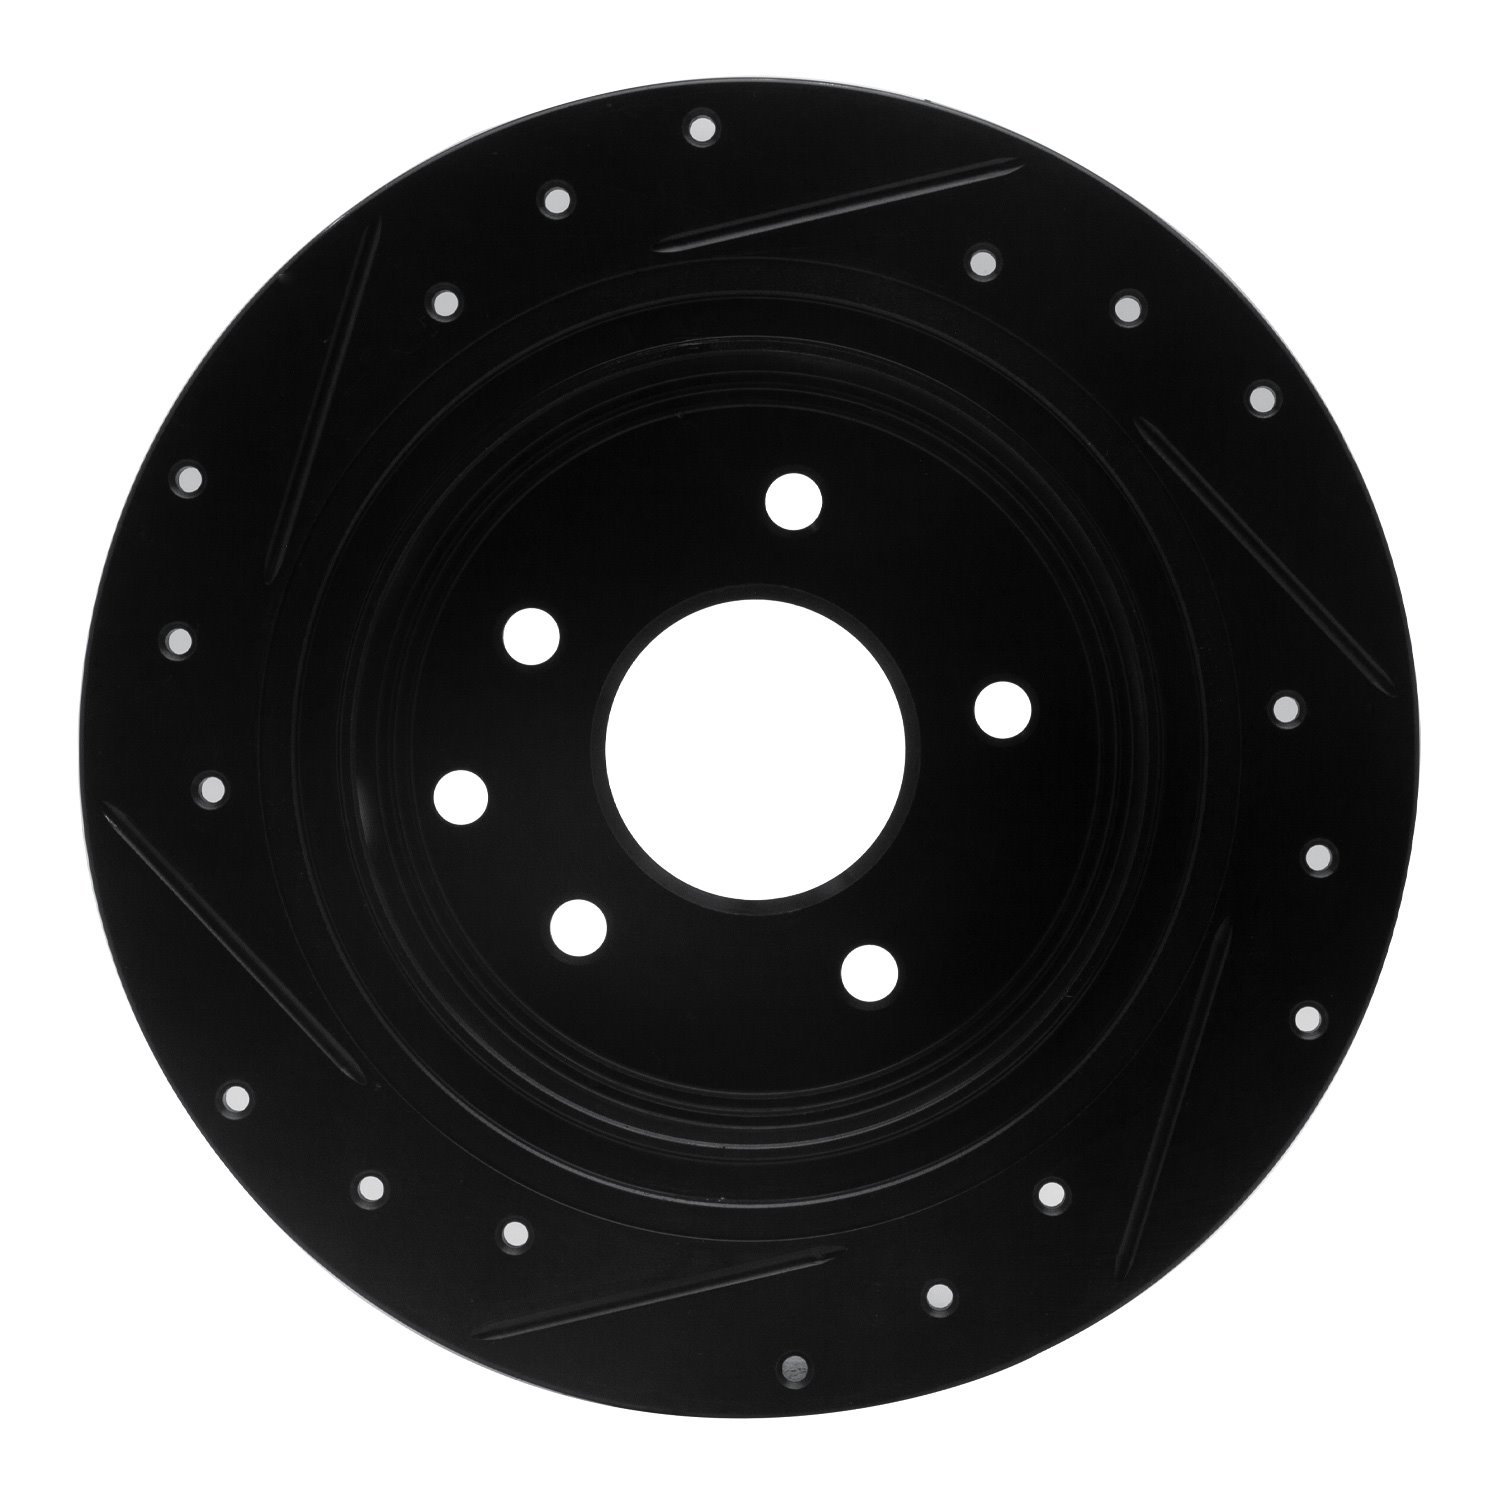 E-Line Drilled & Slotted Black Brake Rotor, Fits Select Fits Multiple Makes/Models, Position: Rear Right